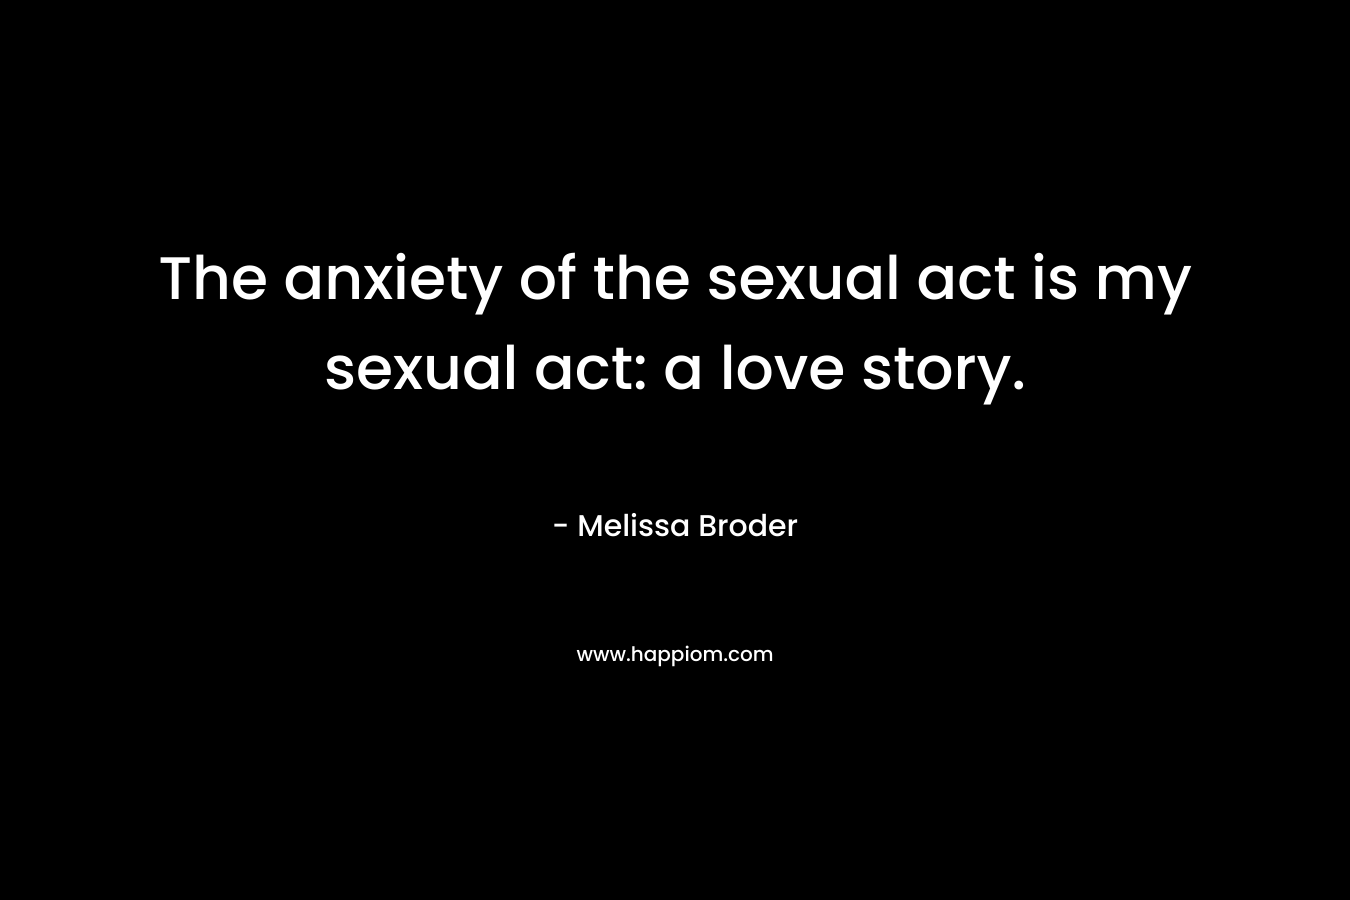 The anxiety of the sexual act is my sexual act: a love story.